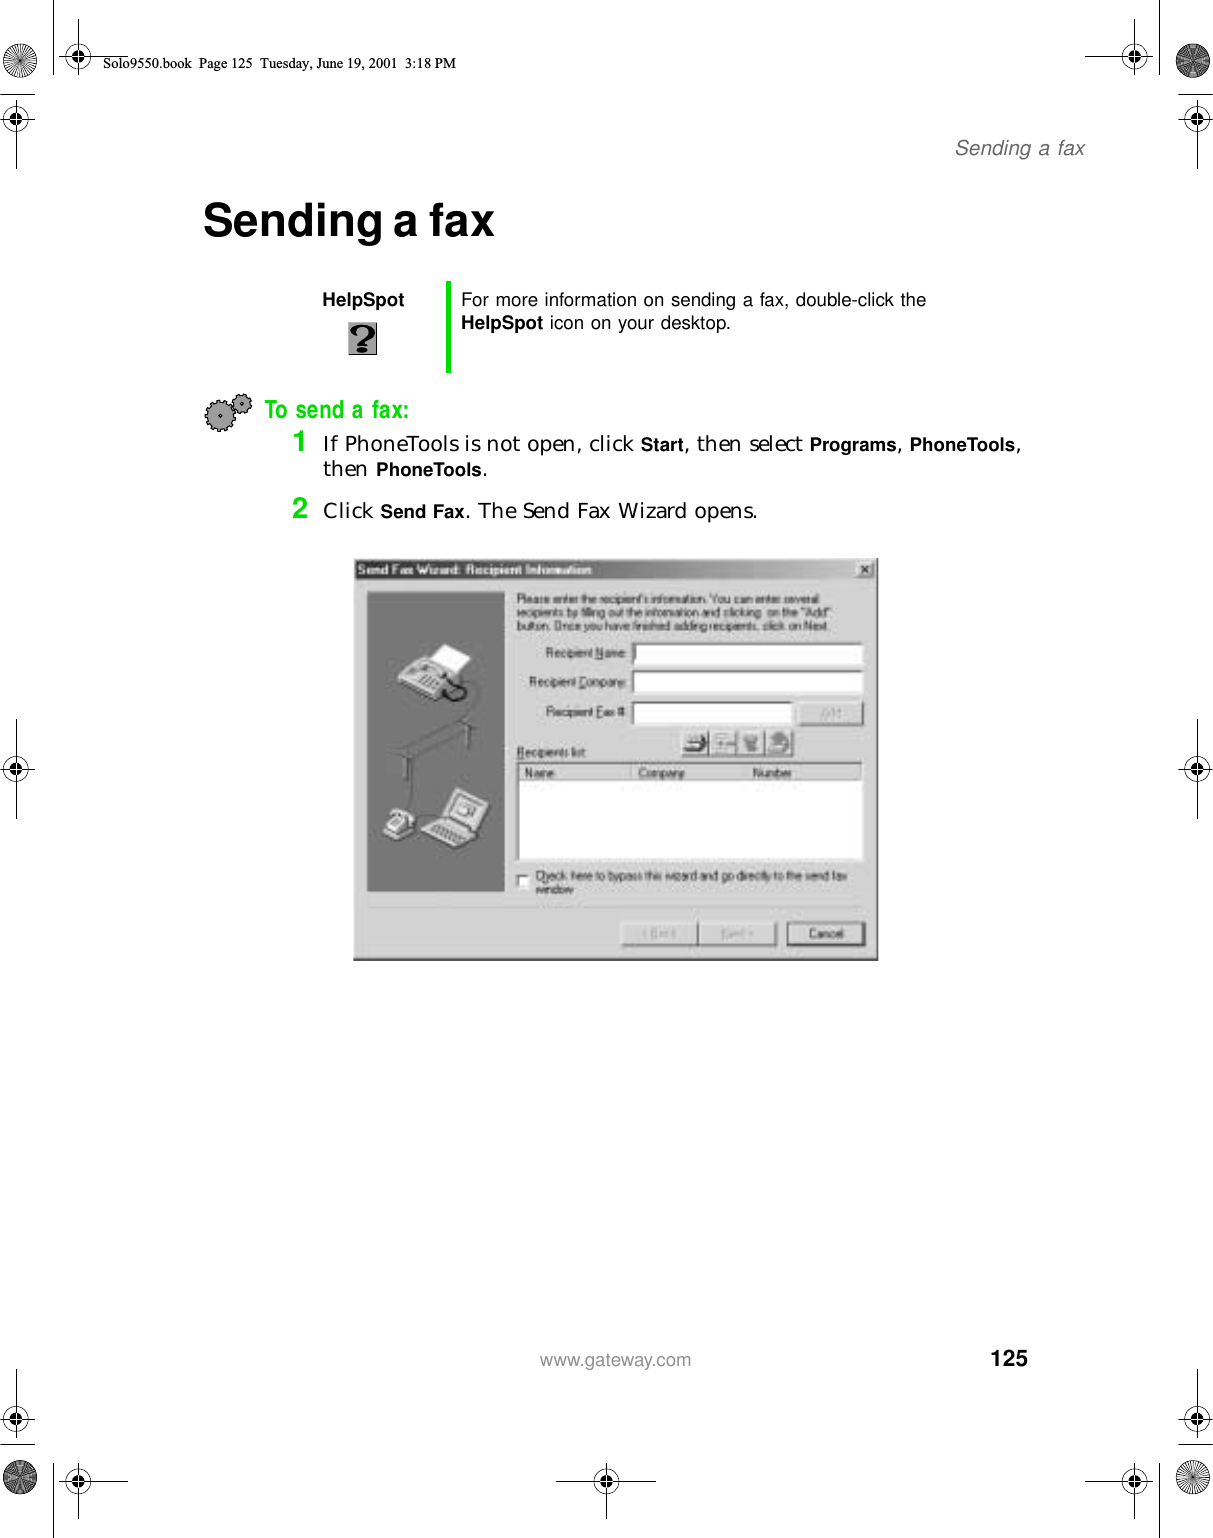 125Sending a faxwww.gateway.comSending a faxTo send a fax:1If PhoneTools is not open, click Start, then select Programs, PhoneTools, then PhoneTools.2Click Send Fax. The Send Fax Wizard opens.HelpSpot For more information on sending a fax, double-click the HelpSpot icon on your desktop.Solo9550.book Page 125 Tuesday, June 19, 2001 3:18 PM